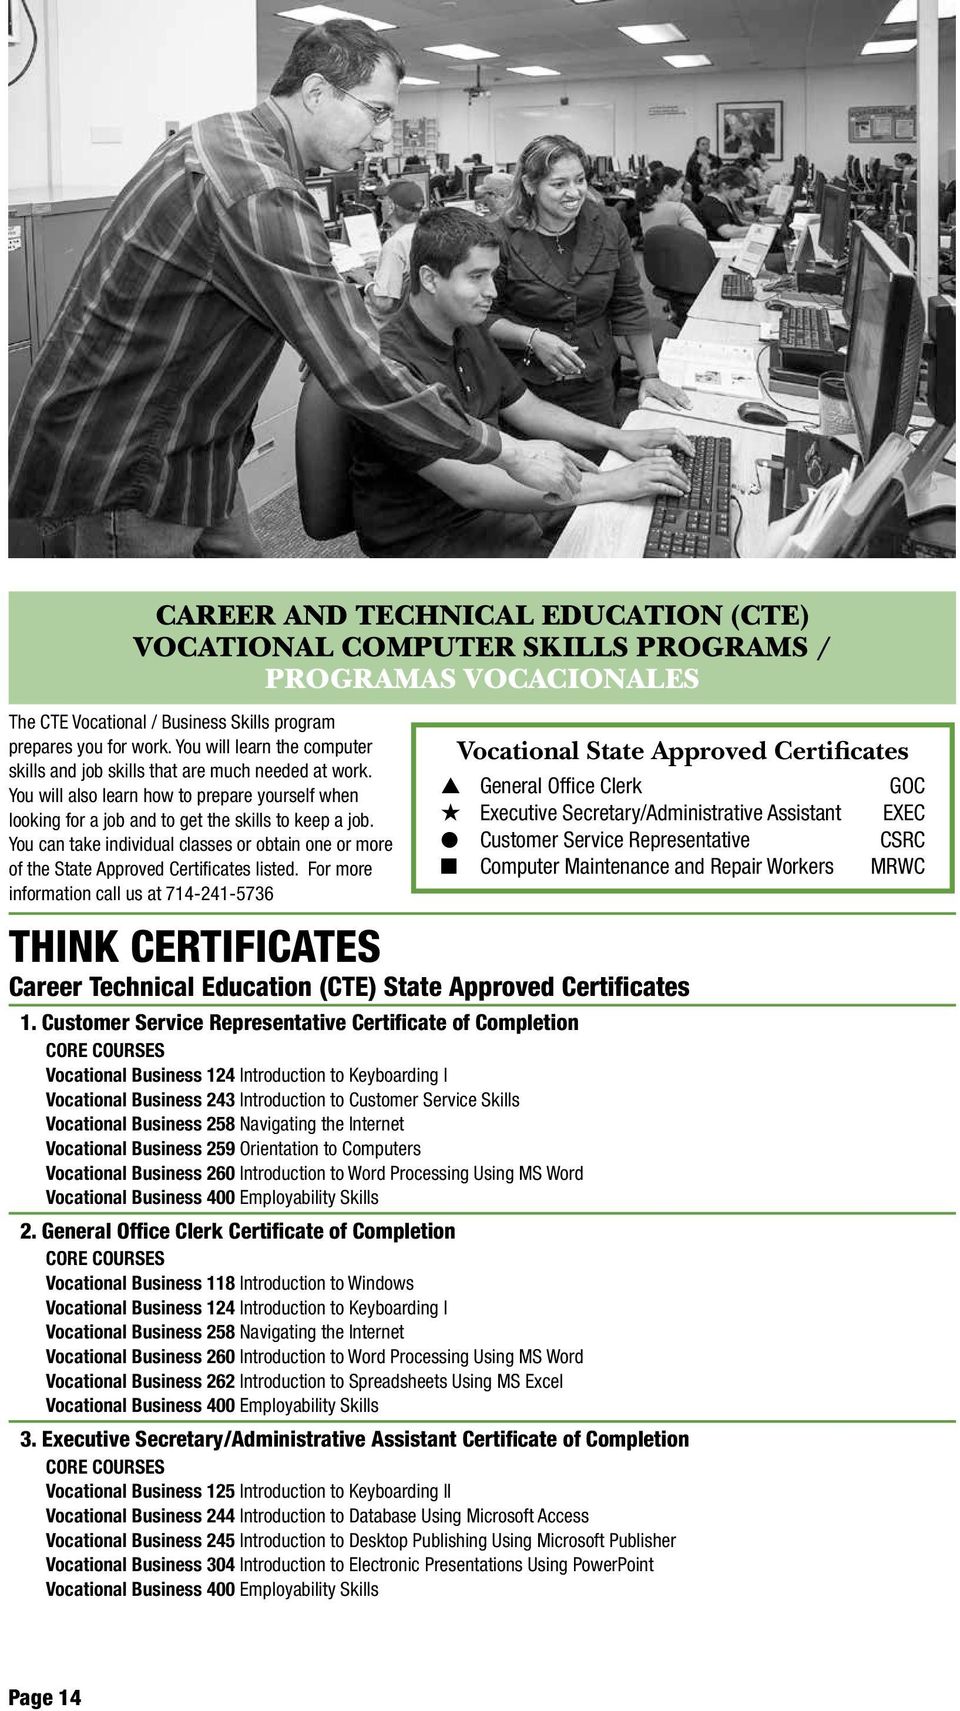 You can take individual classes or obtain one or more of the State Approved Certificates listed.